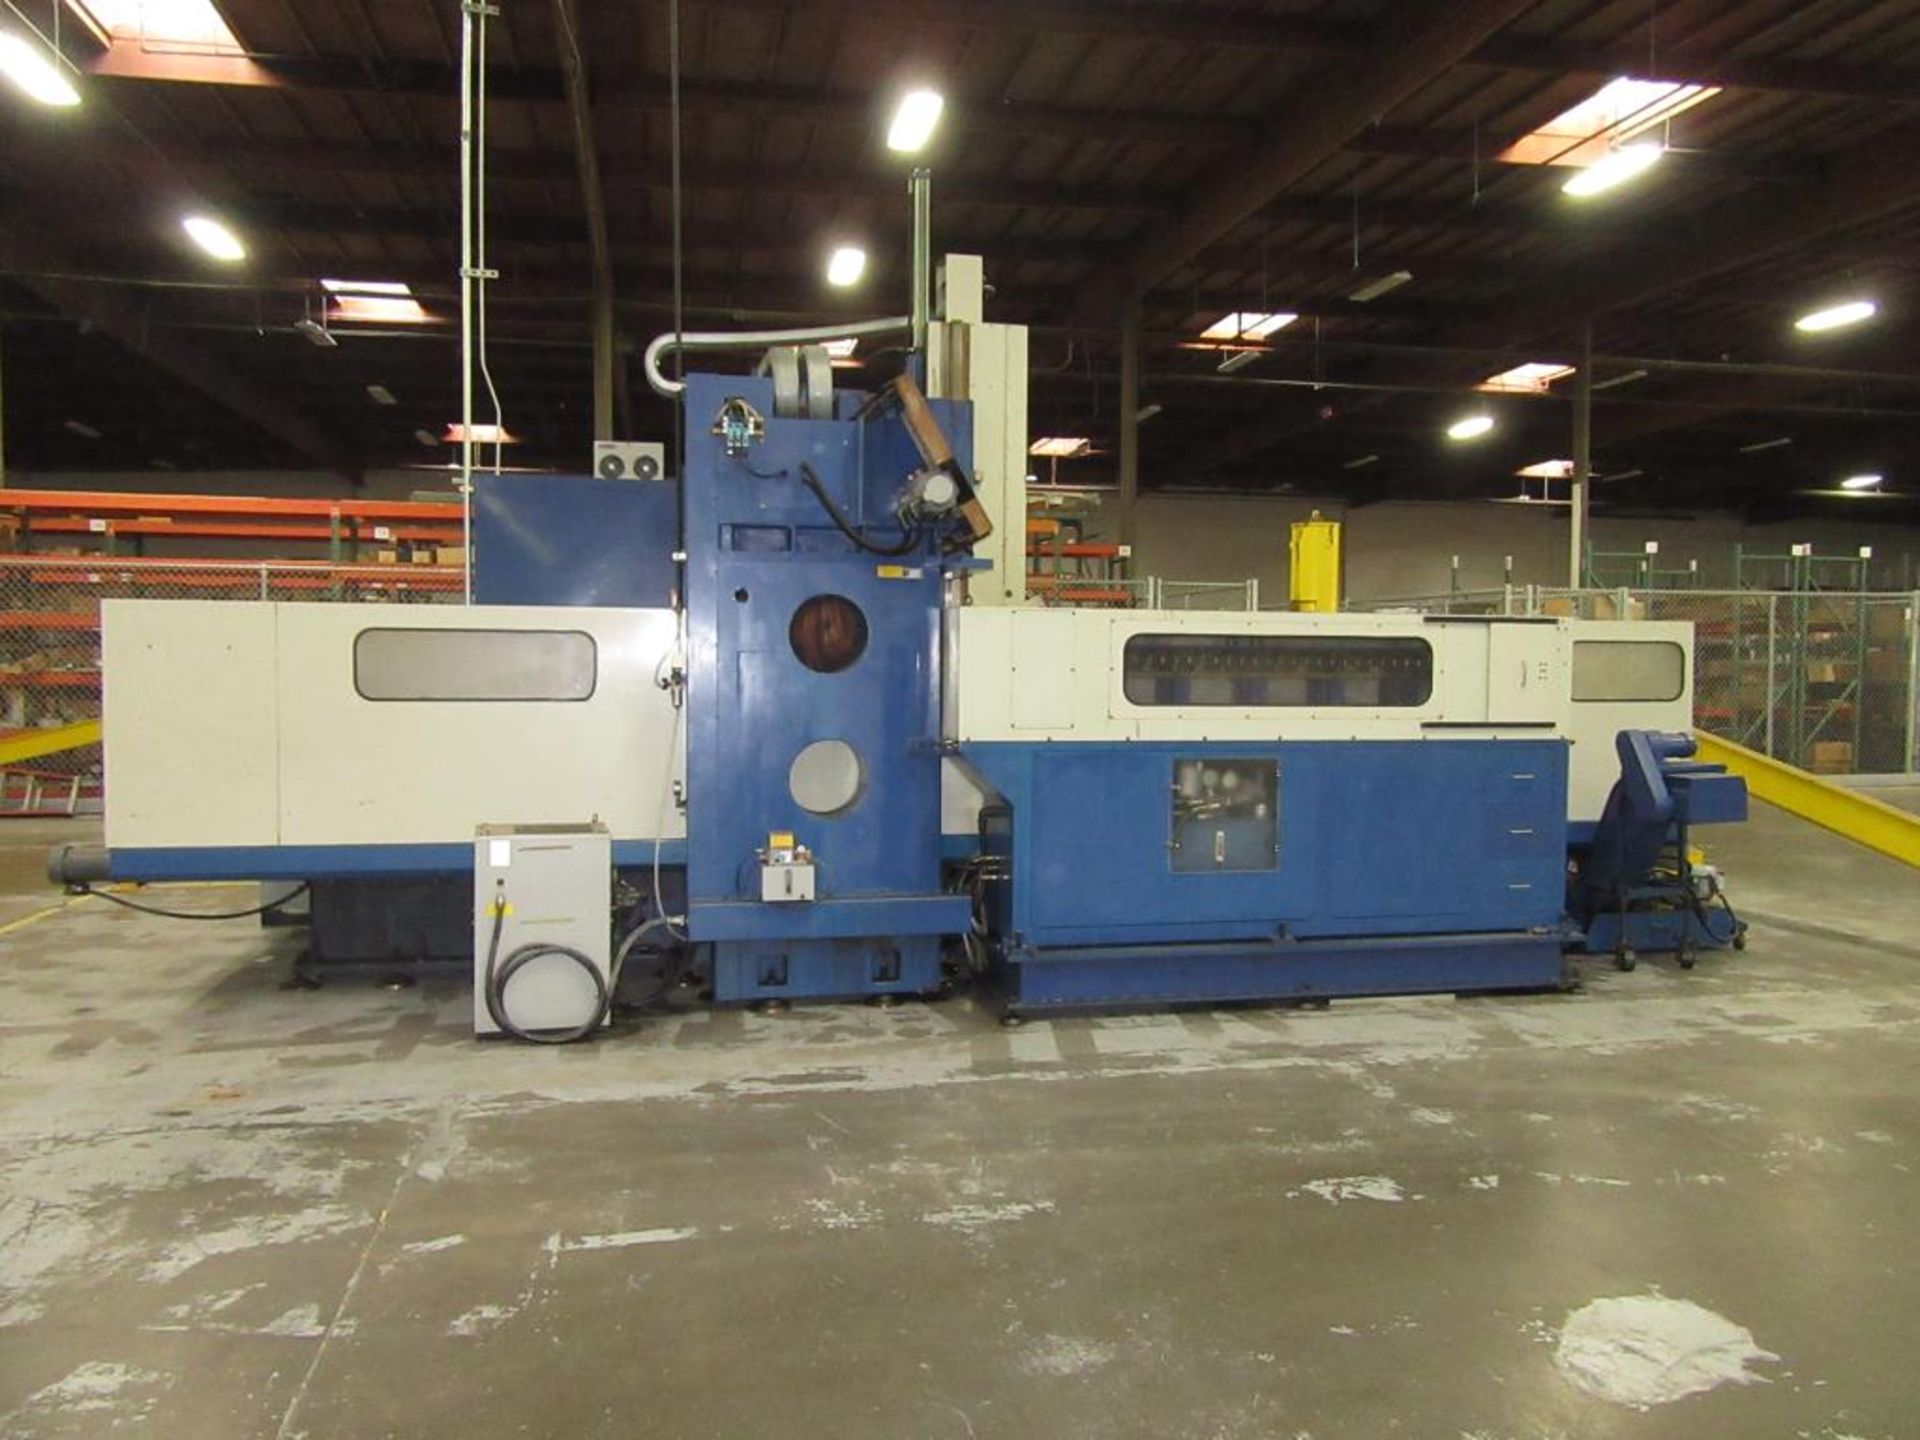 Viper HB-130W. 1997 - CNC Vertical Bridge Mill with Mitsubishi 3-Axis Control Panel, Table Size - Image 16 of 22